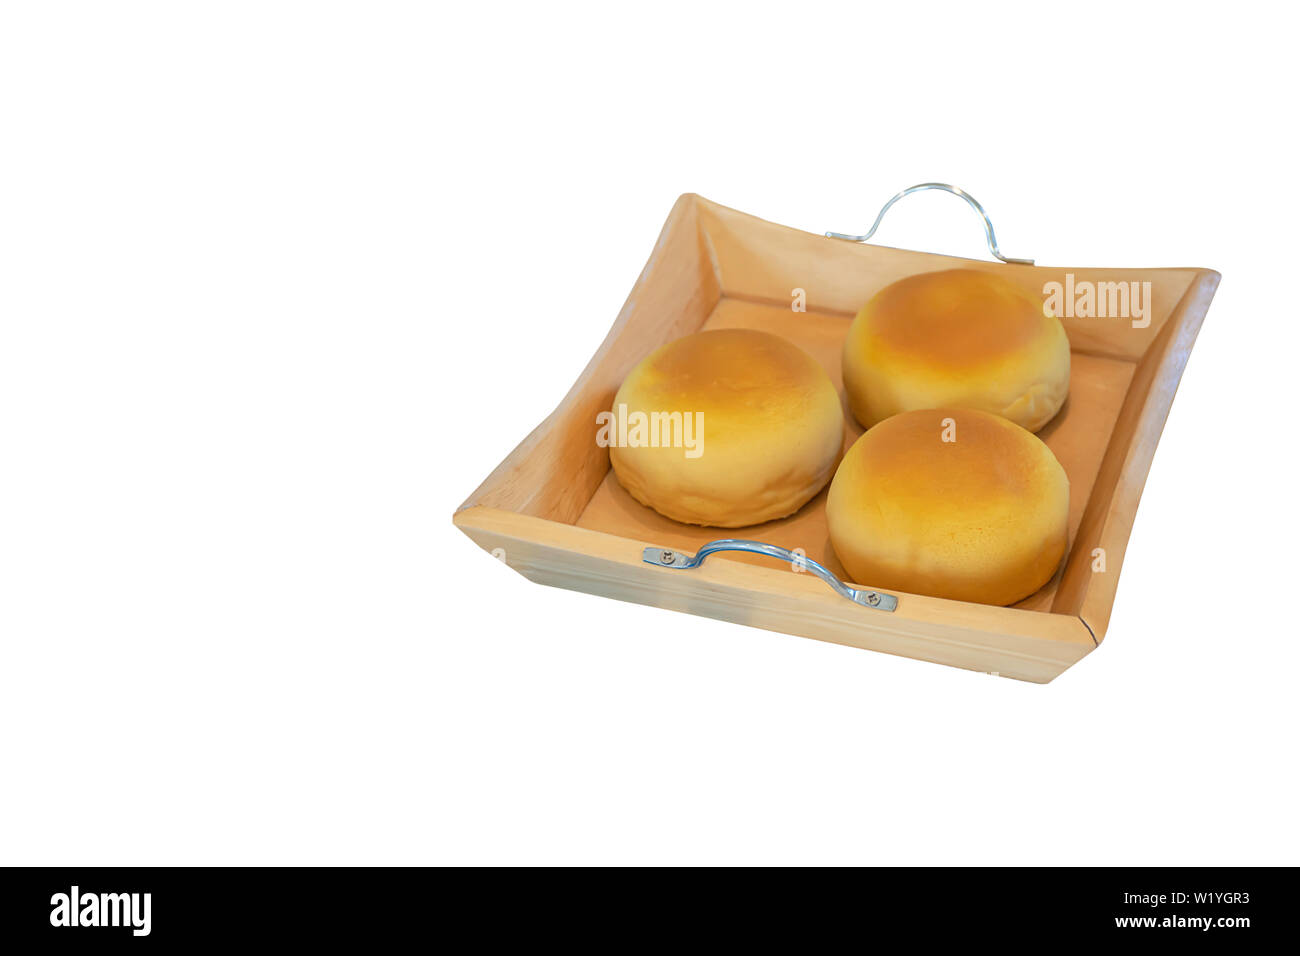 Isolated bread made from plastic in wood plate on a white background with clipping path. Stock Photo